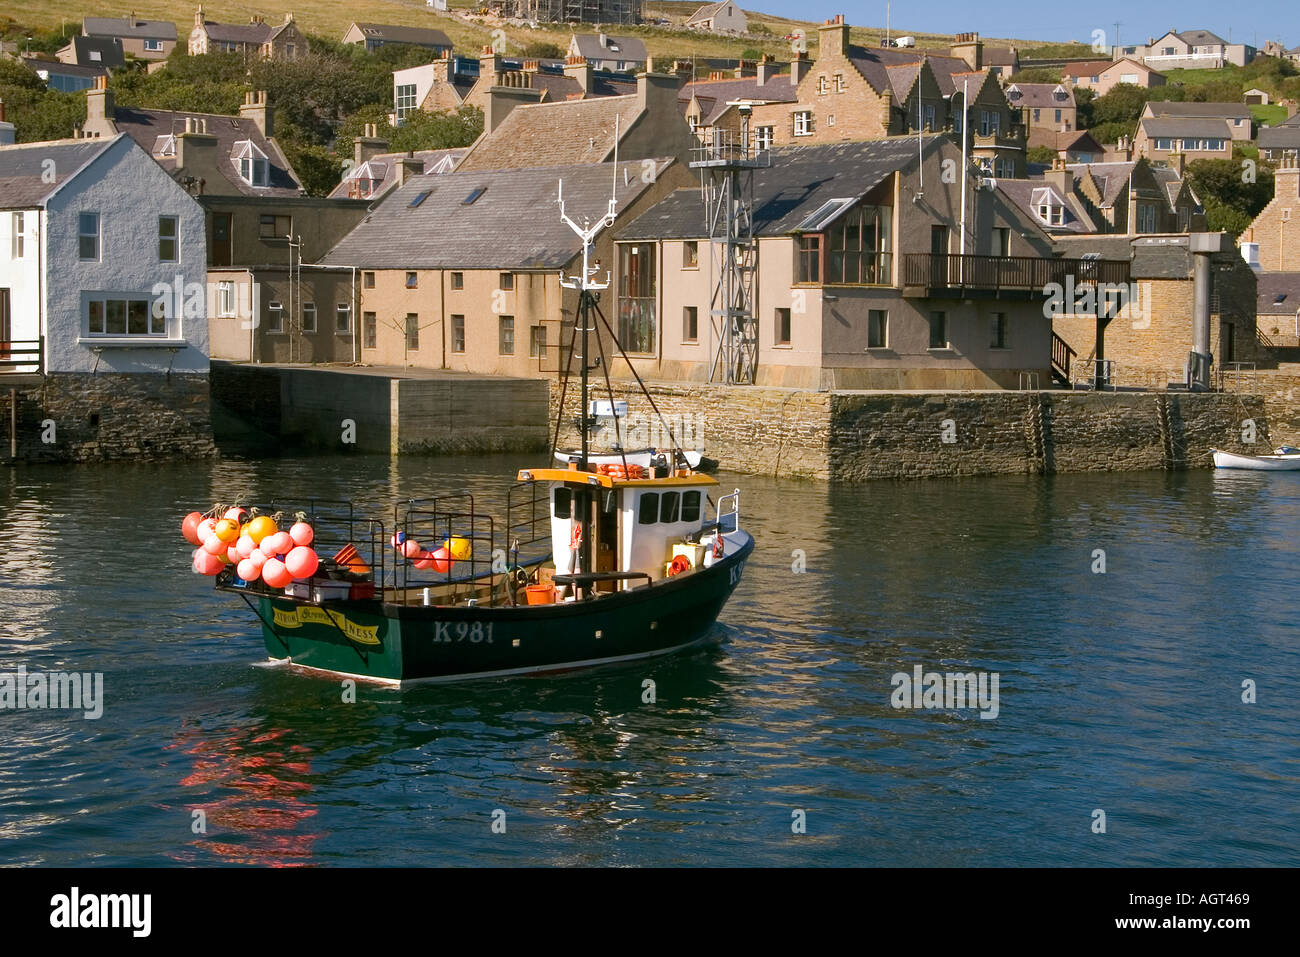 dh Fishing creel boat STROMNESS HARBOUR ORKNEY SCOTLAND Harbours waterfront fishingboat arriving fish industry uk scottish island community Stock Photo